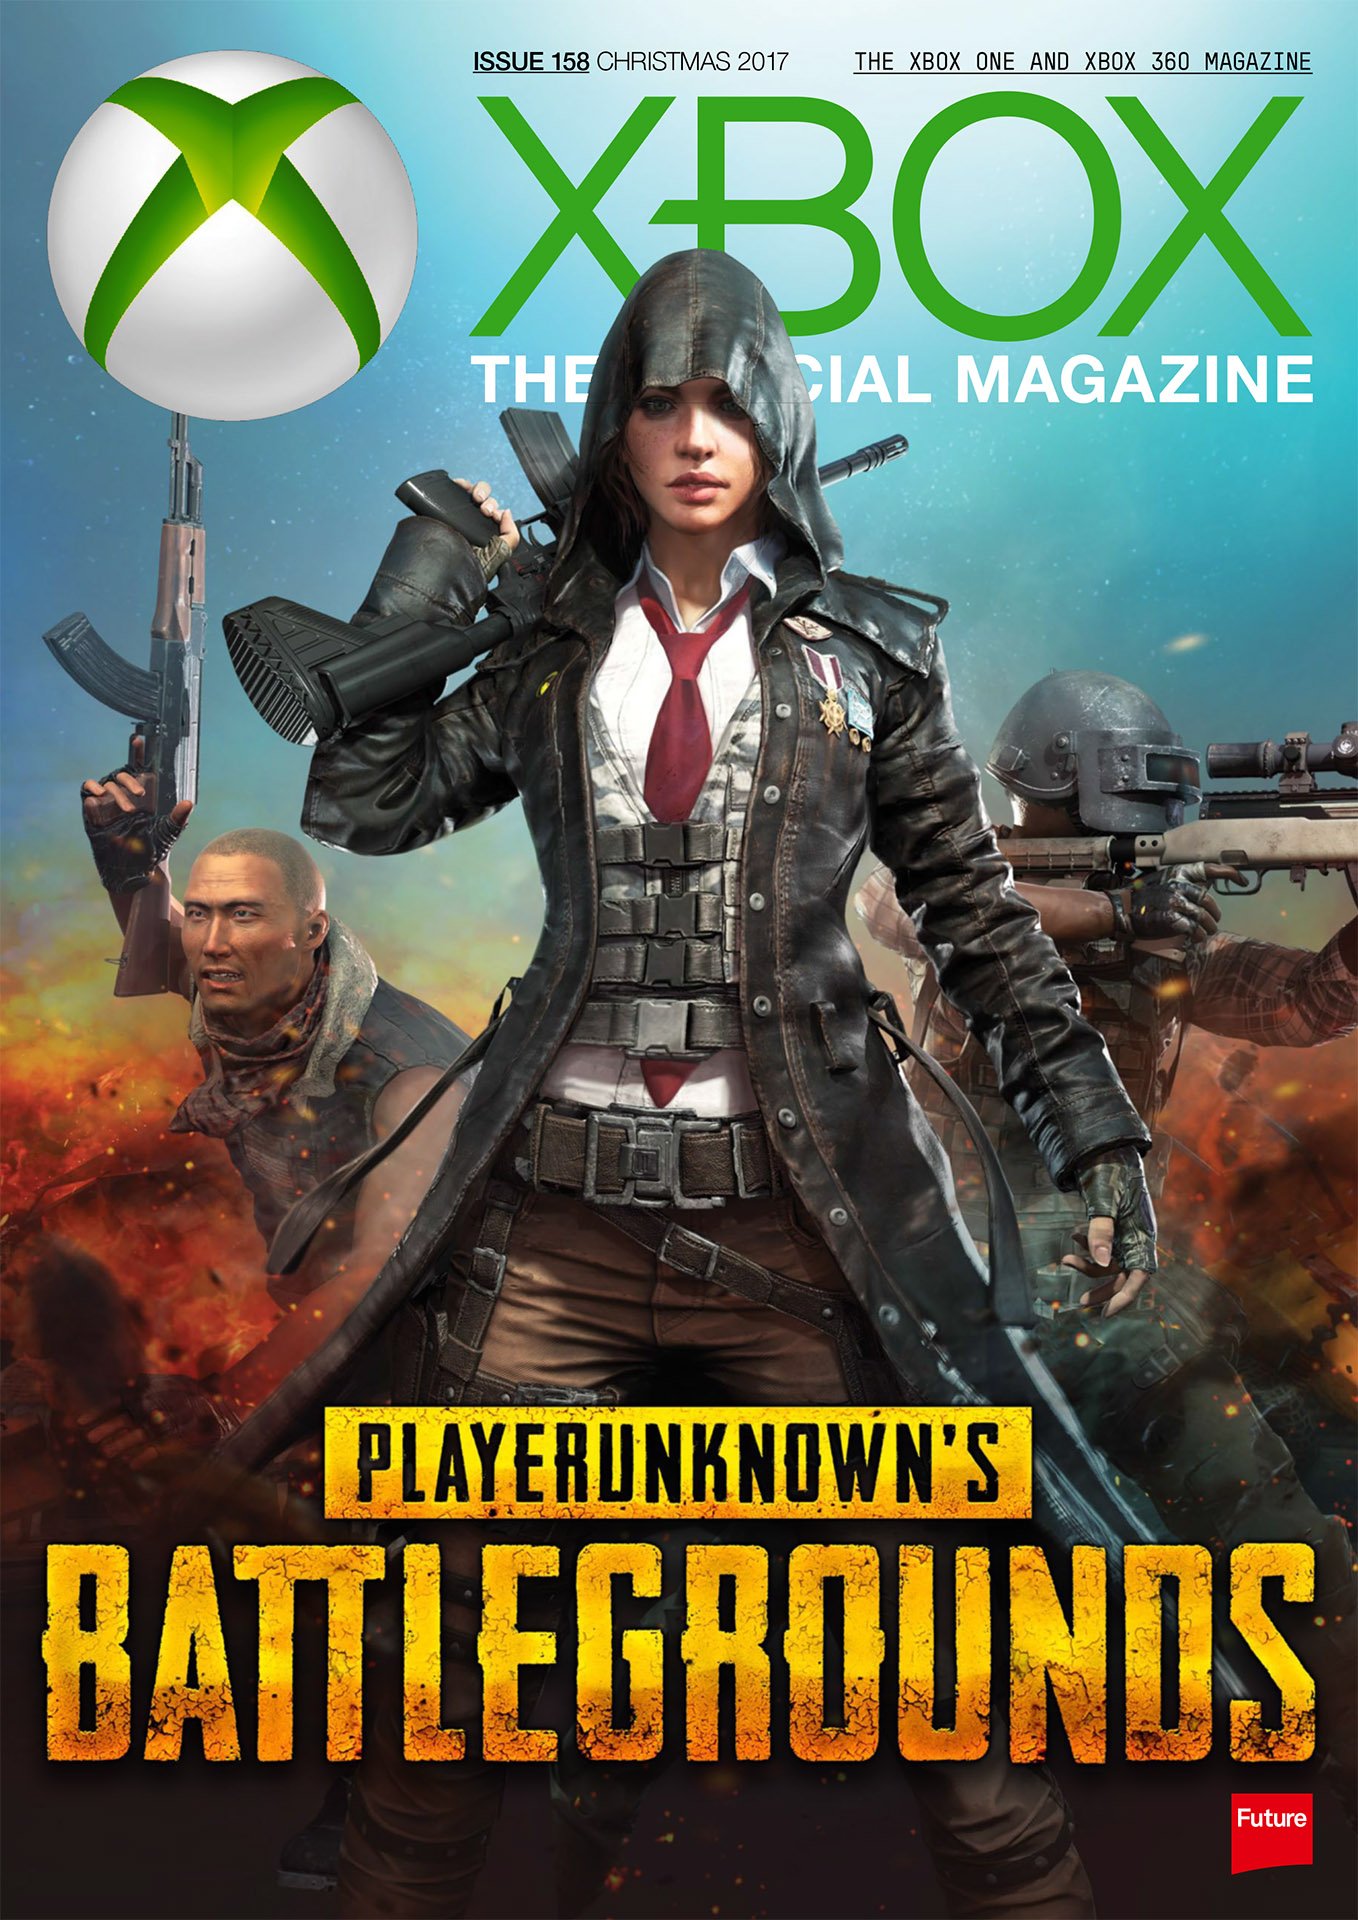 XBOX The Official Magazine Issue 158 (Christmas 2017)